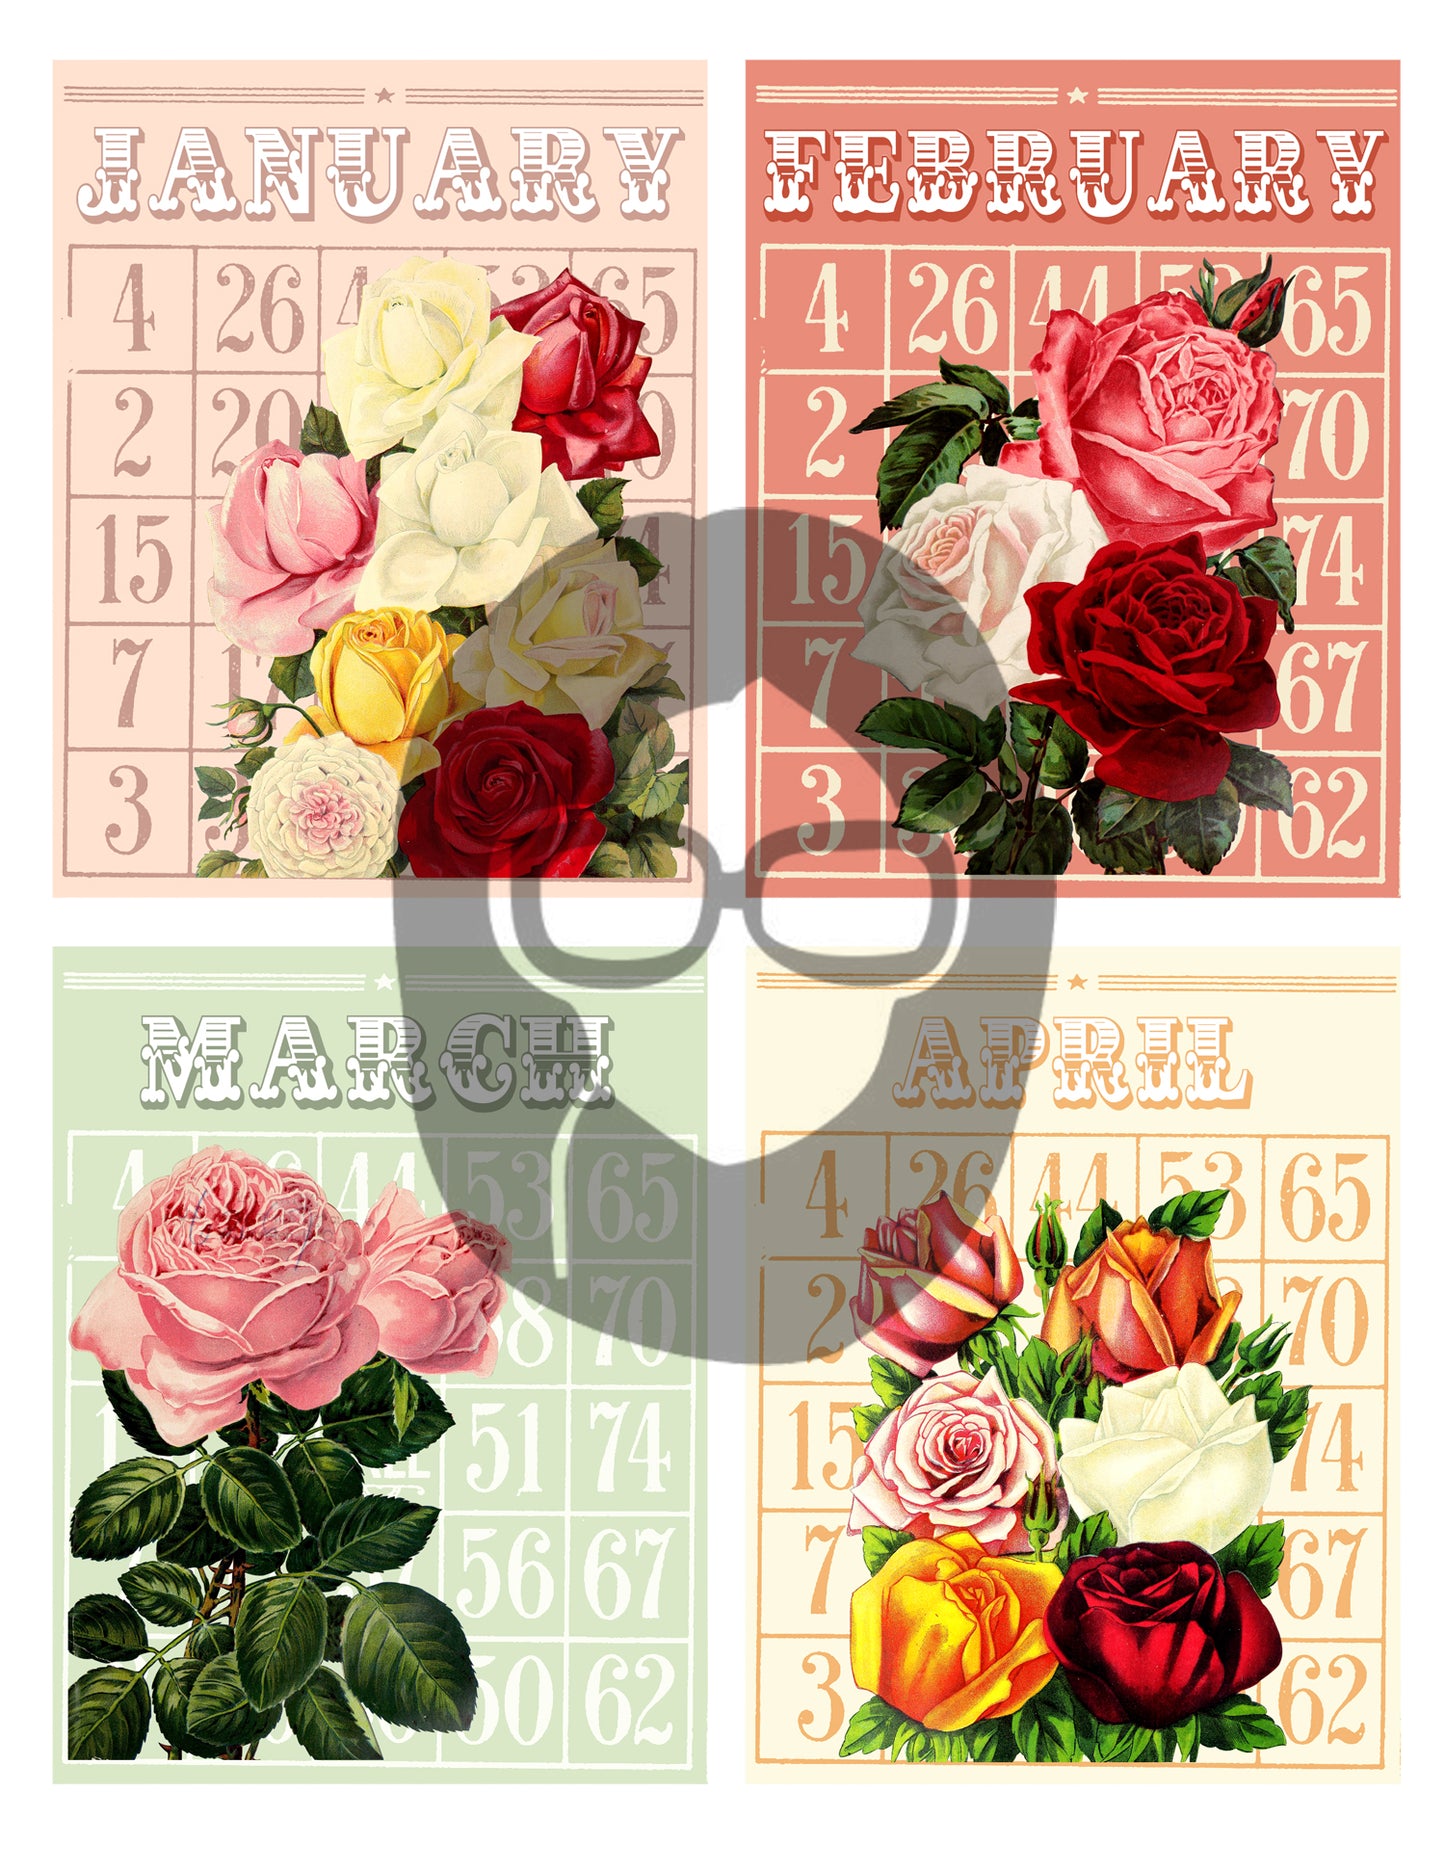 Bingo Flowers Junk Journal Cards - Months of the Year - 3 Pg Instant Download - digital roses floral junk journal supply